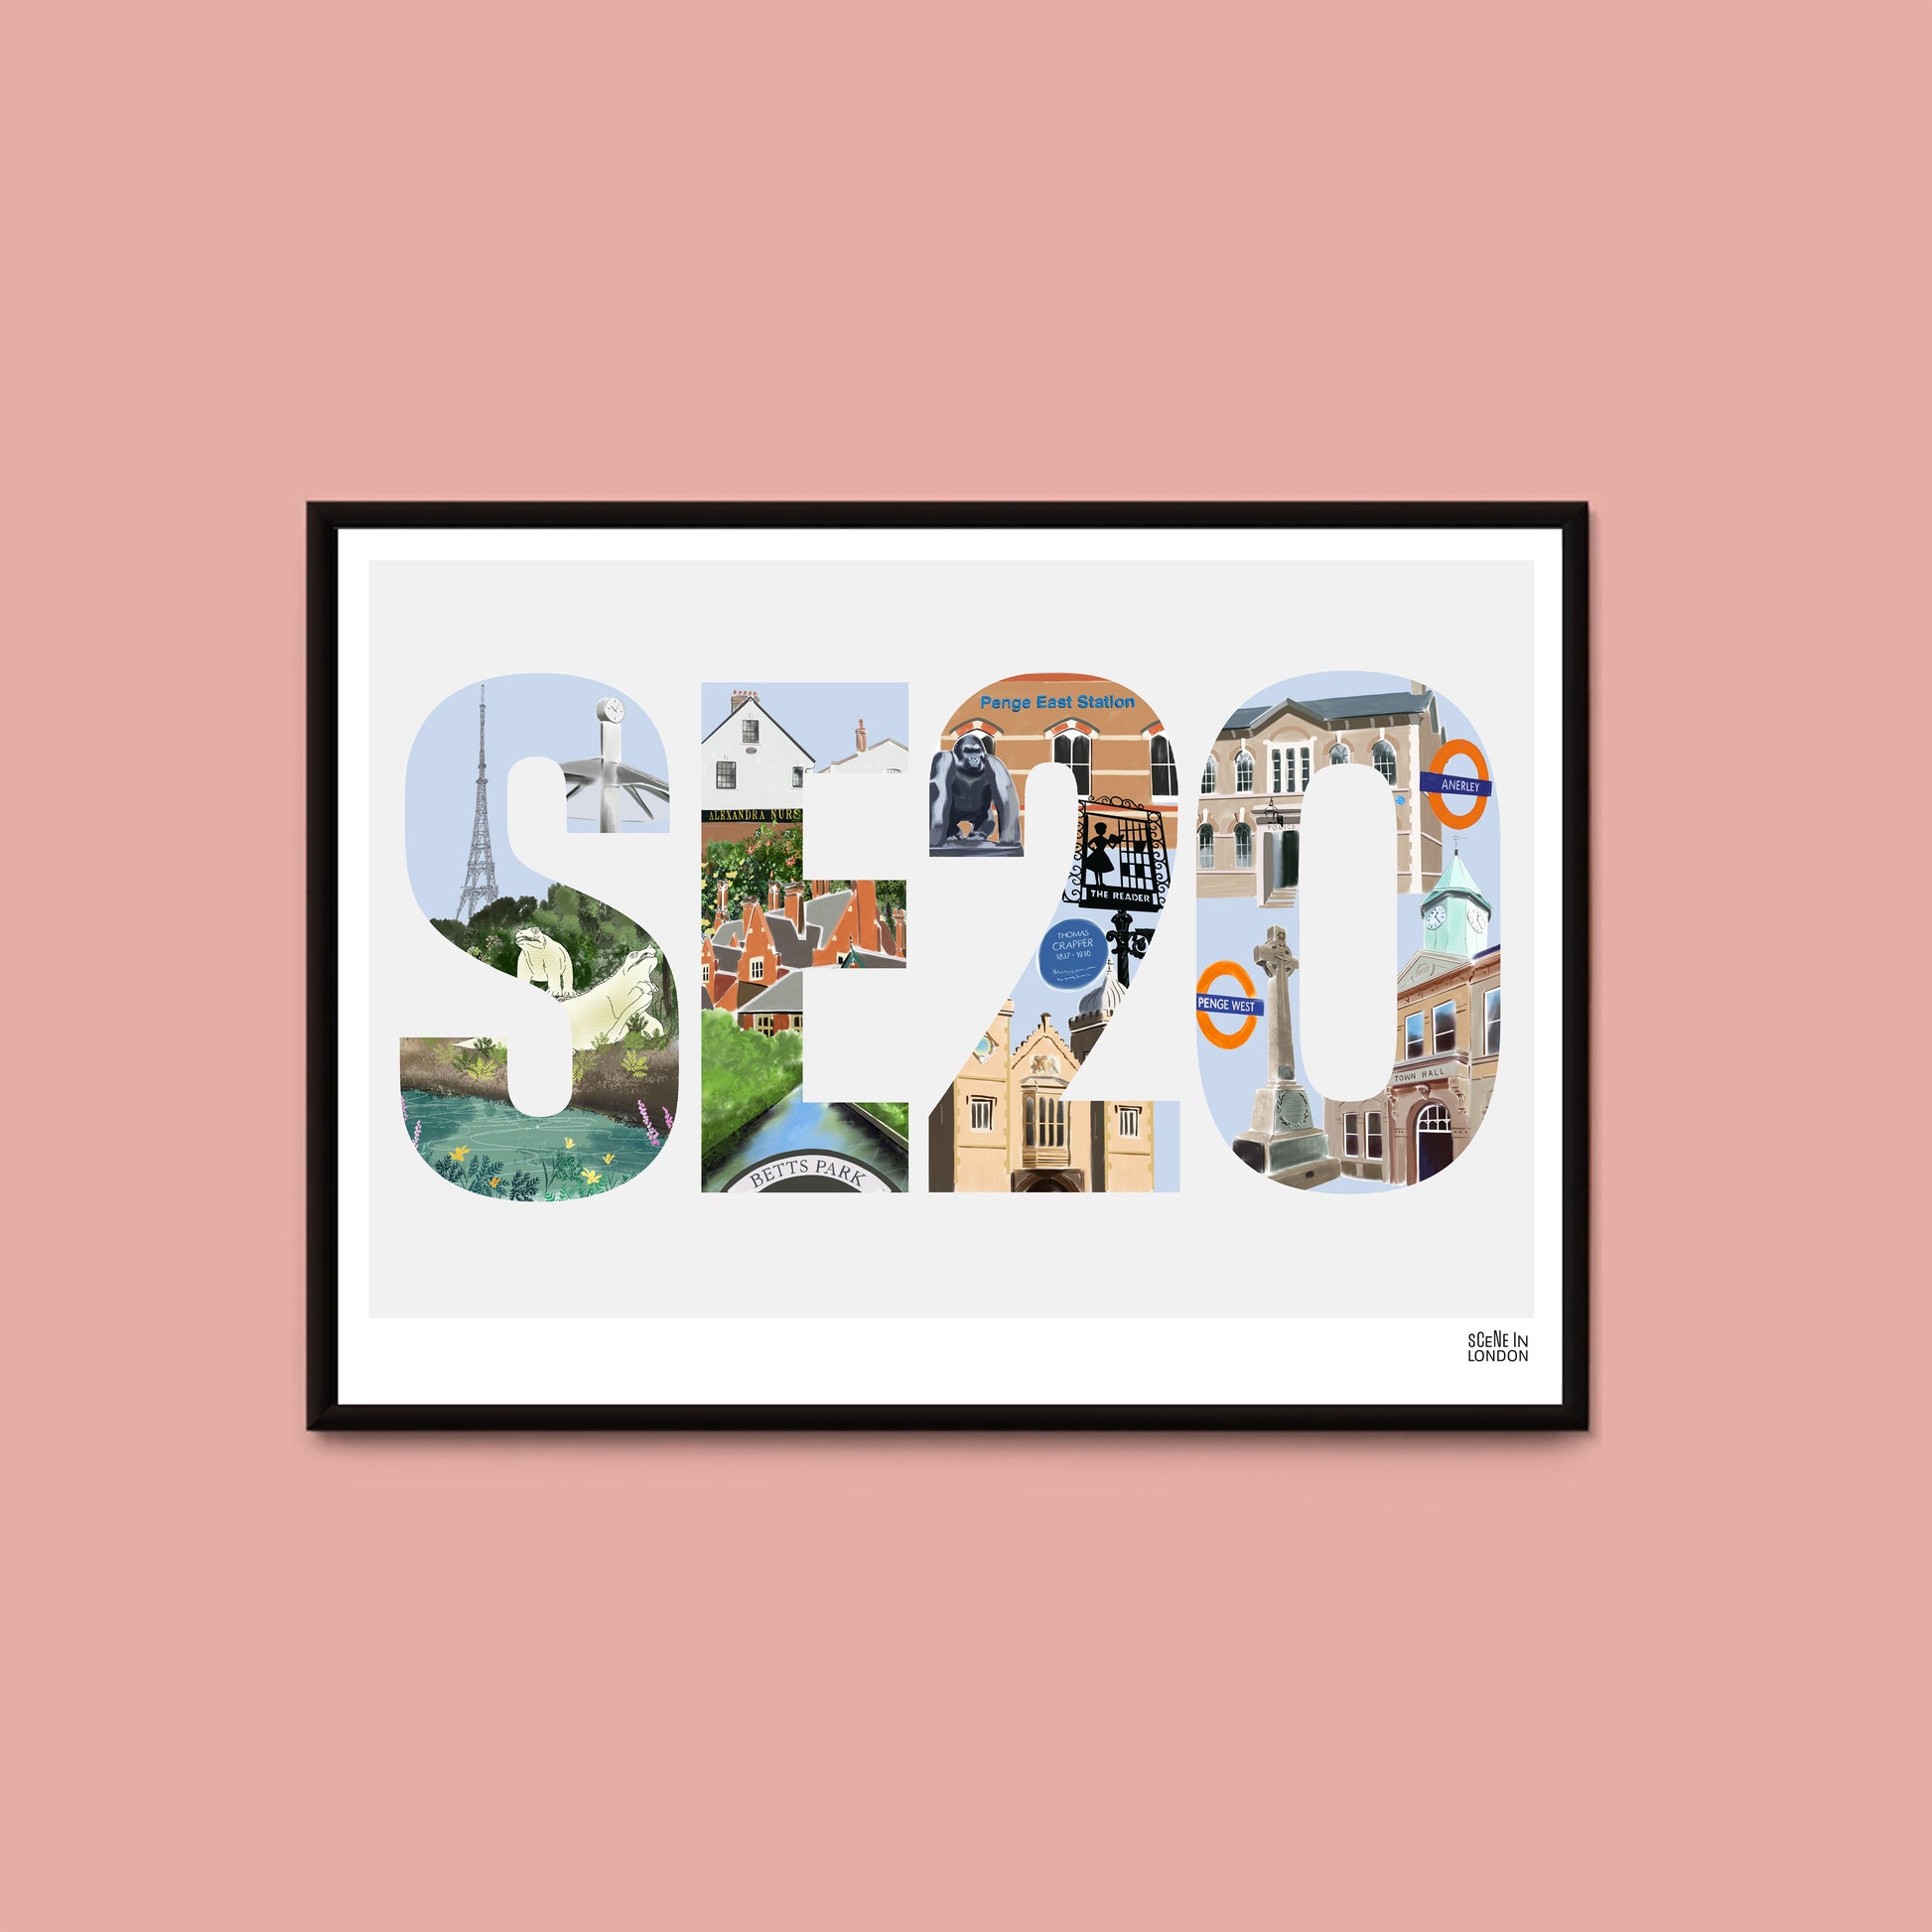 Print featuring places in SE20, Penge and Anerley in London